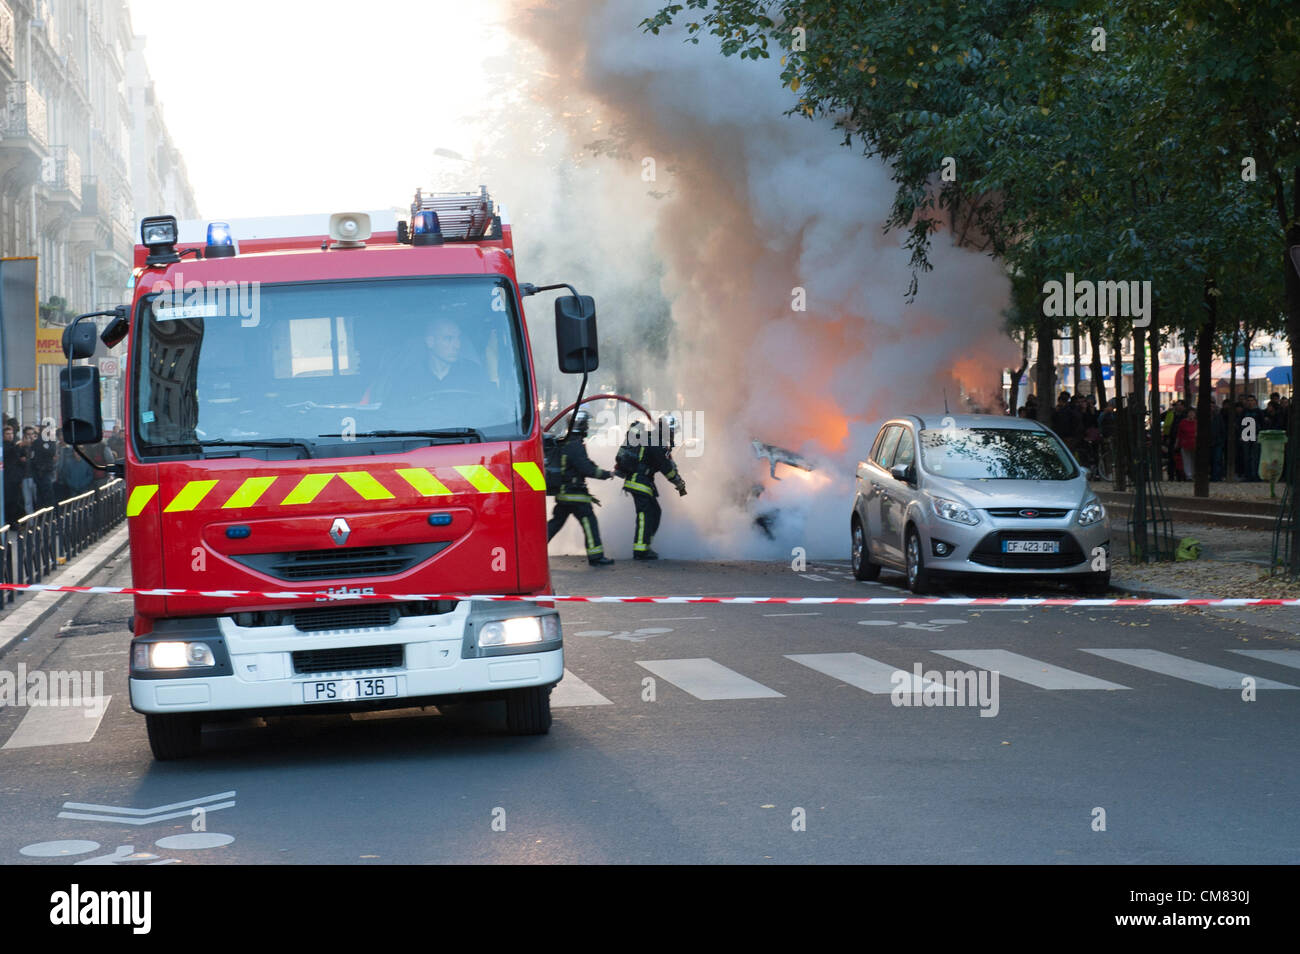 PARIS, FRANCE, 25th October 2012. Early evening car fire near to the Place De Clichy, Paris, France. Stock Photo